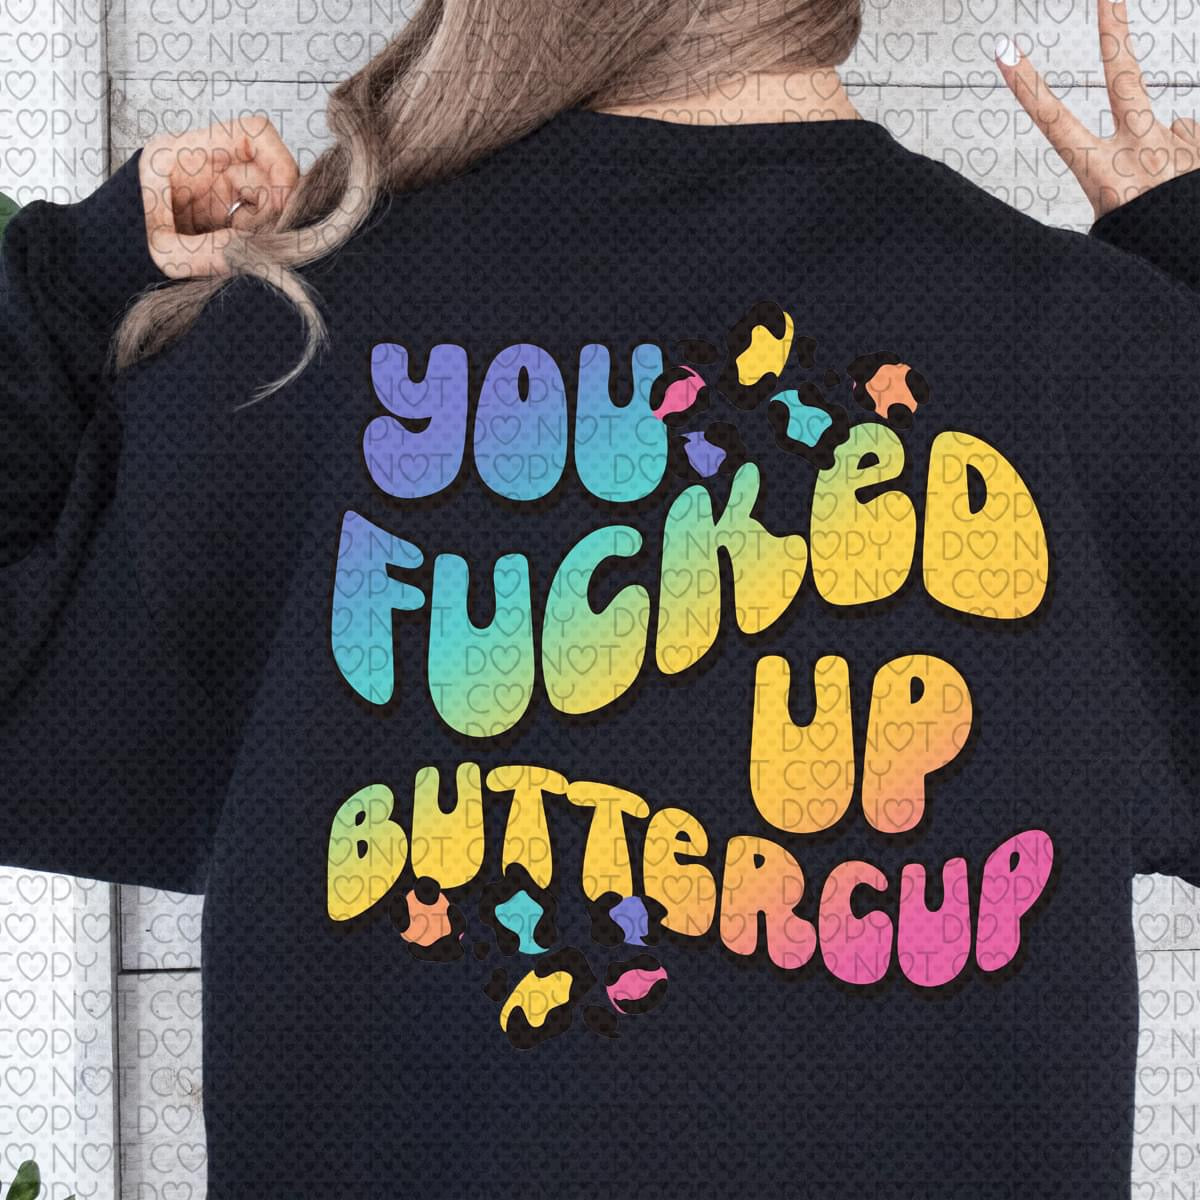 You f*cked up buttercup DTF